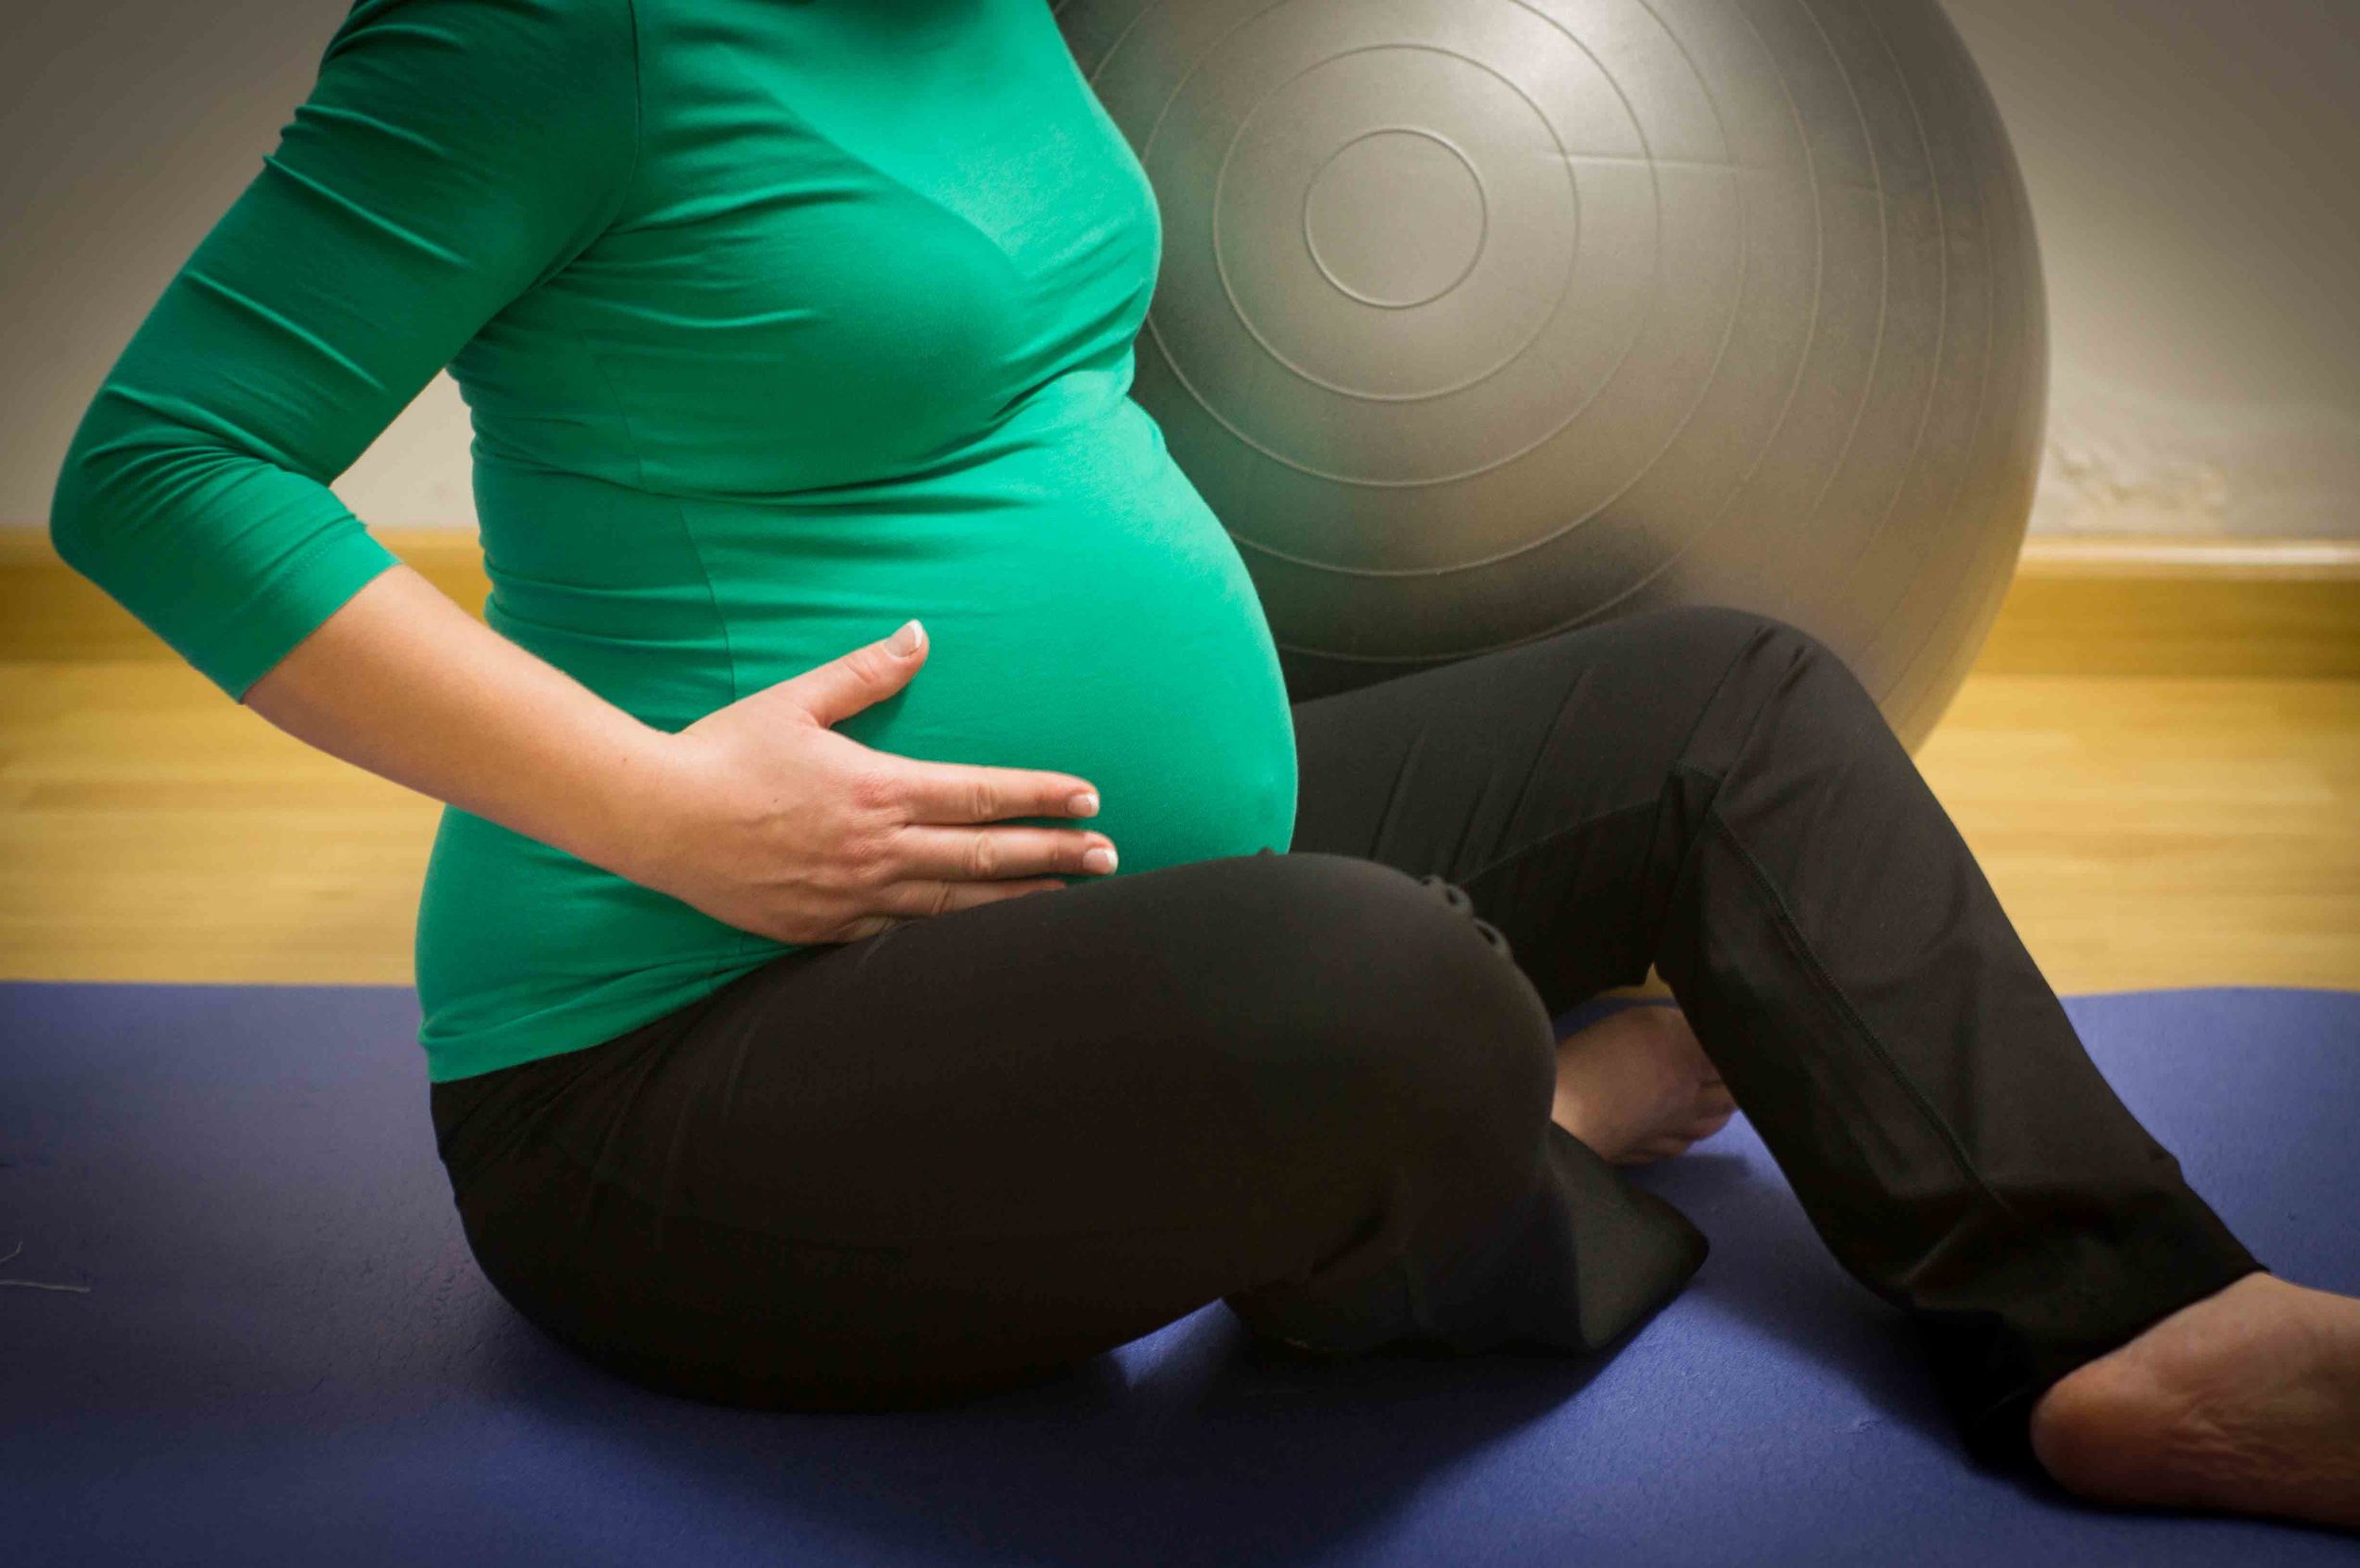 7 Exercises You Should Not Do While Pregnant